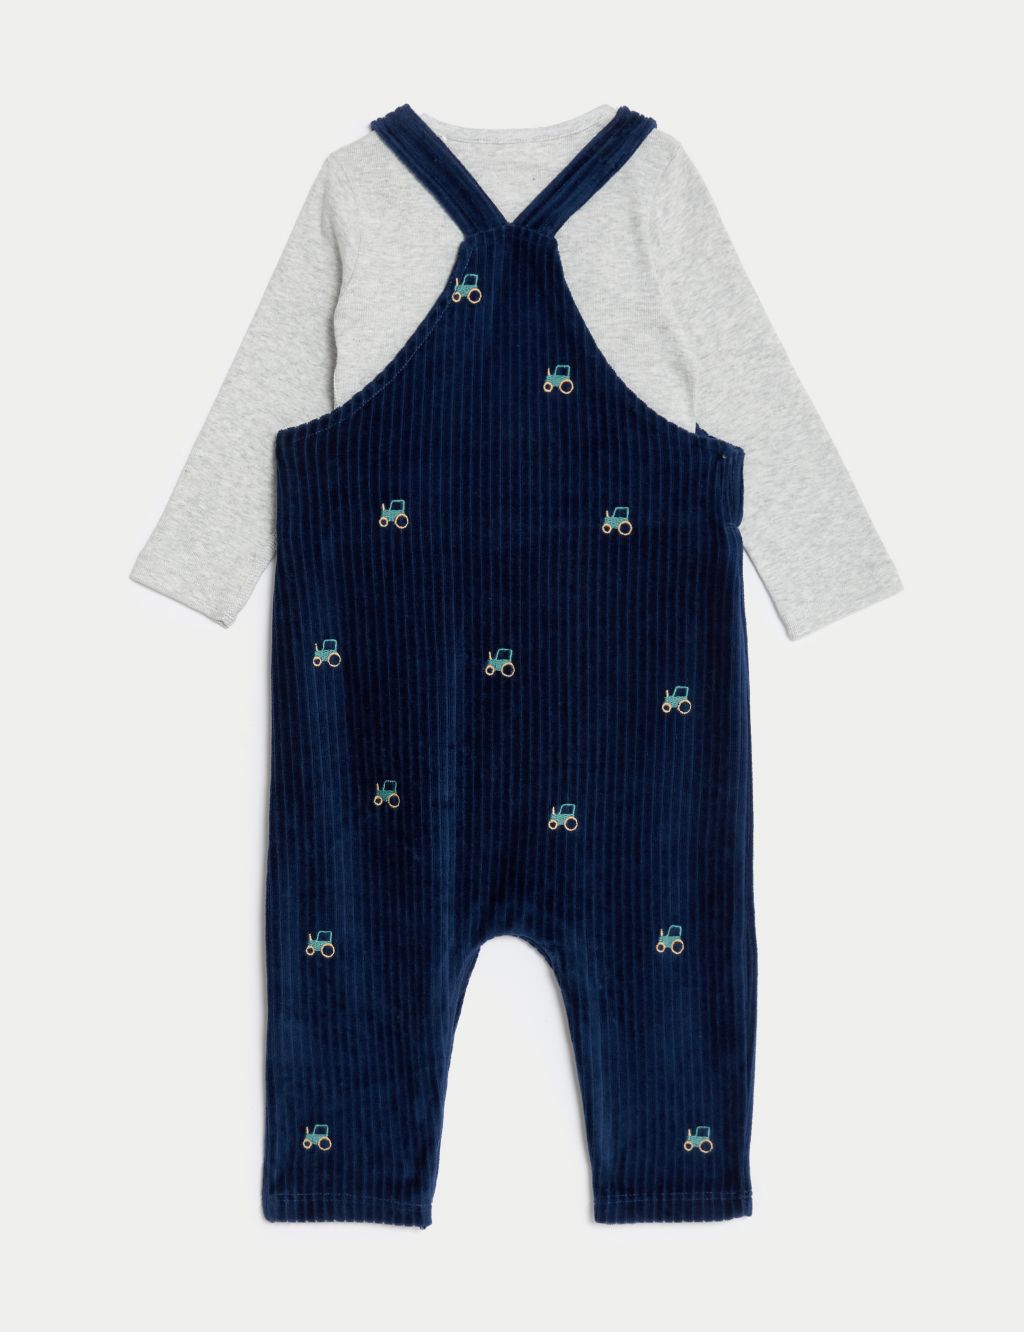 2pc Tractor Dungaree Outfit (0-3 Yrs) image 3